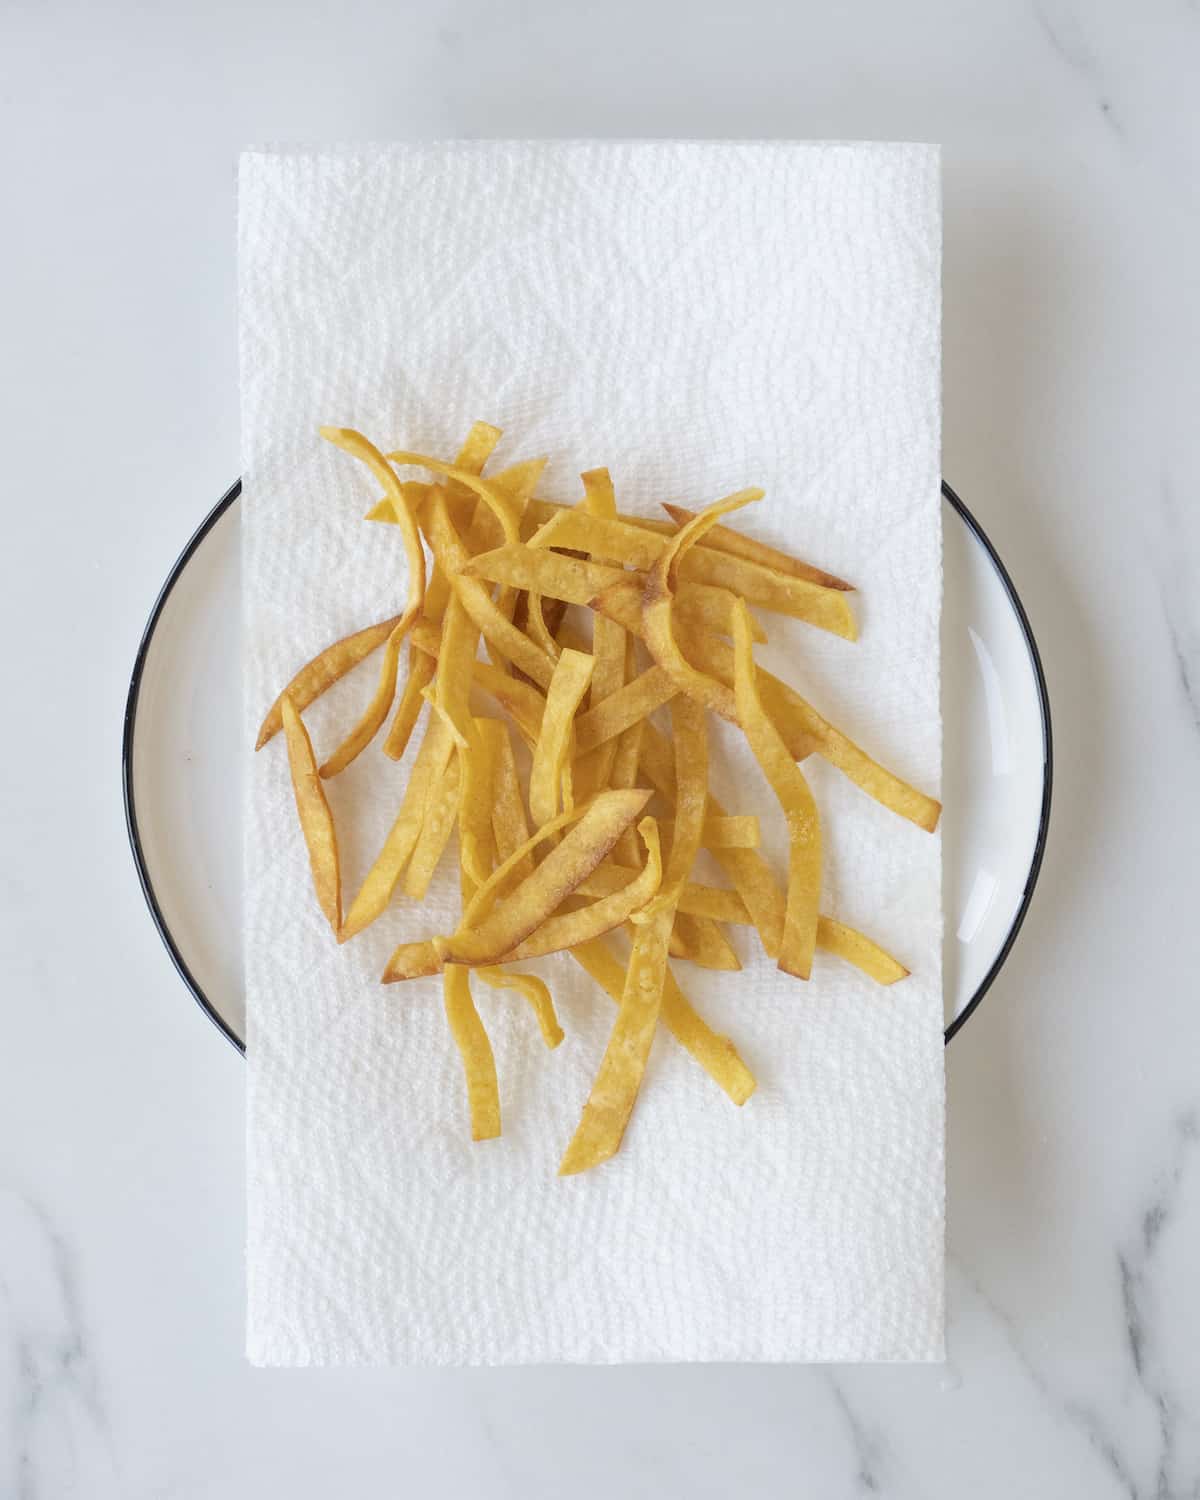 A ceramic plate with fried tortilla strips and a paper towel beneath them on a white countertop. 